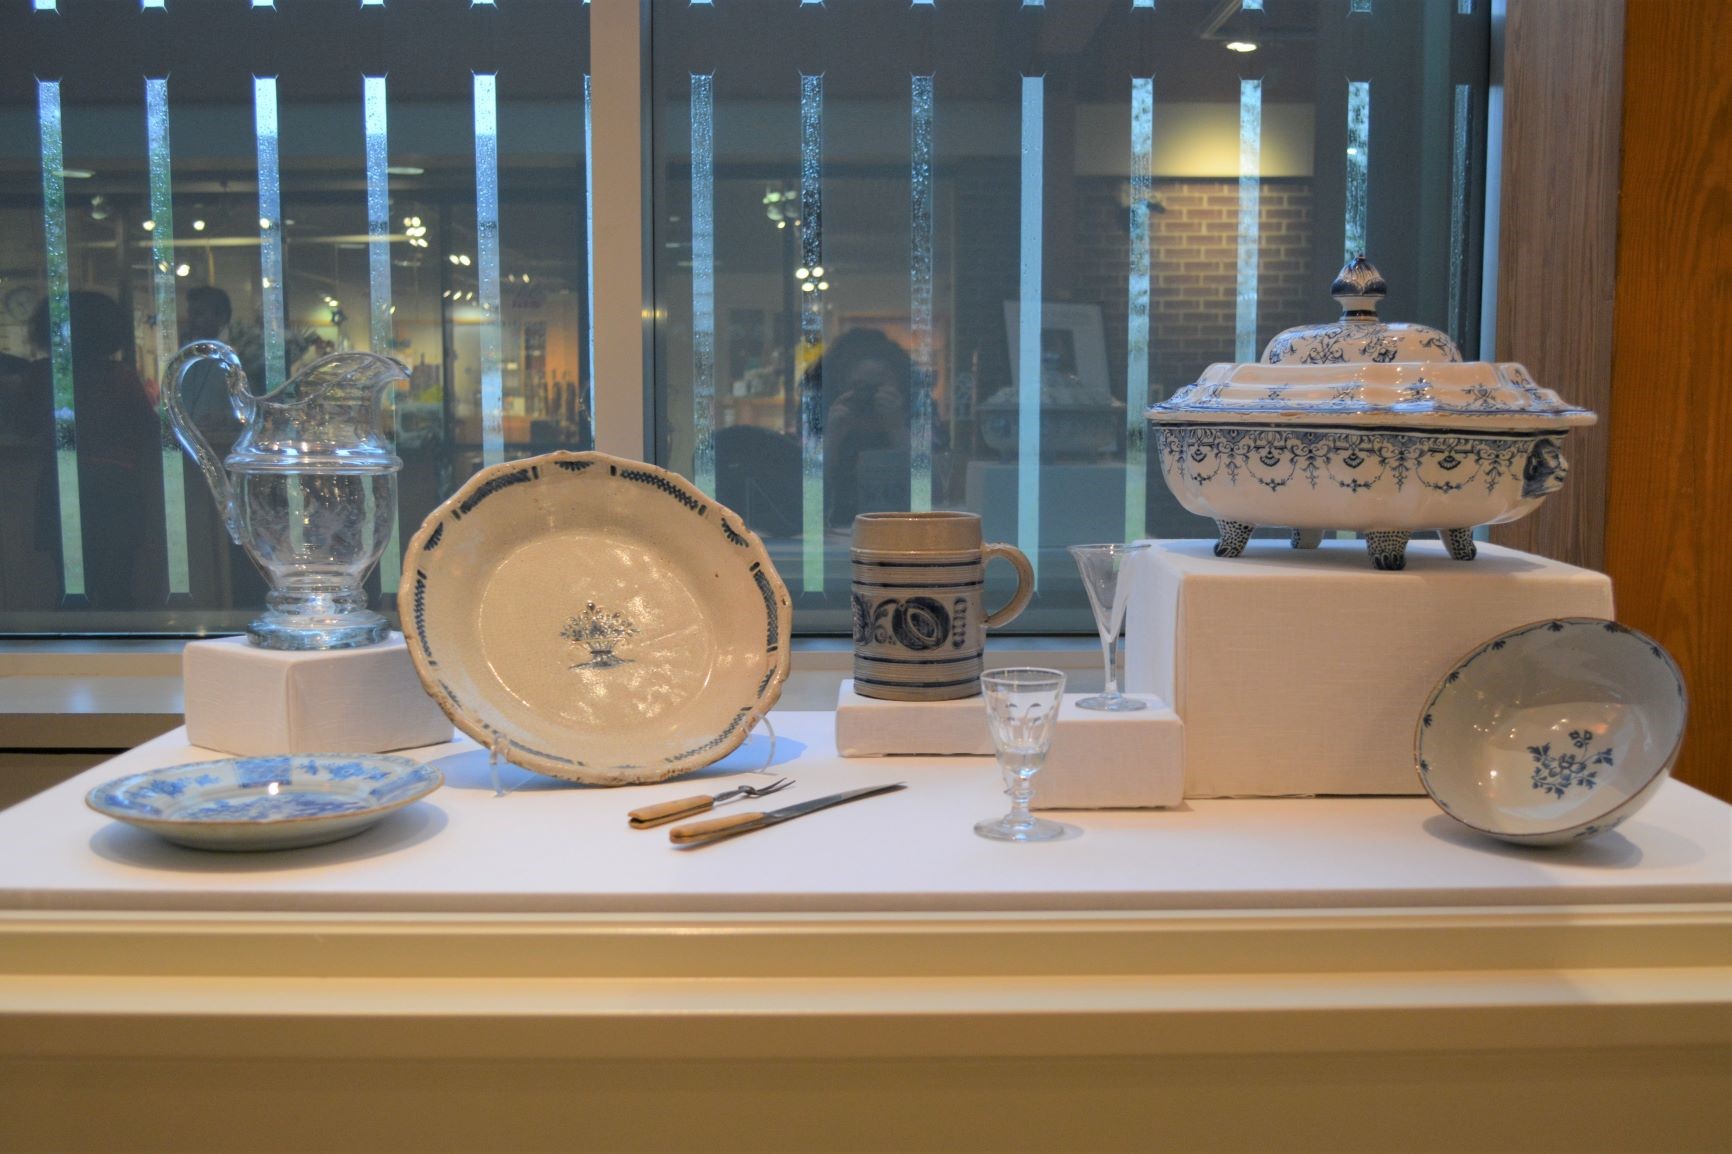 display of white dishes with blue decorative patterns